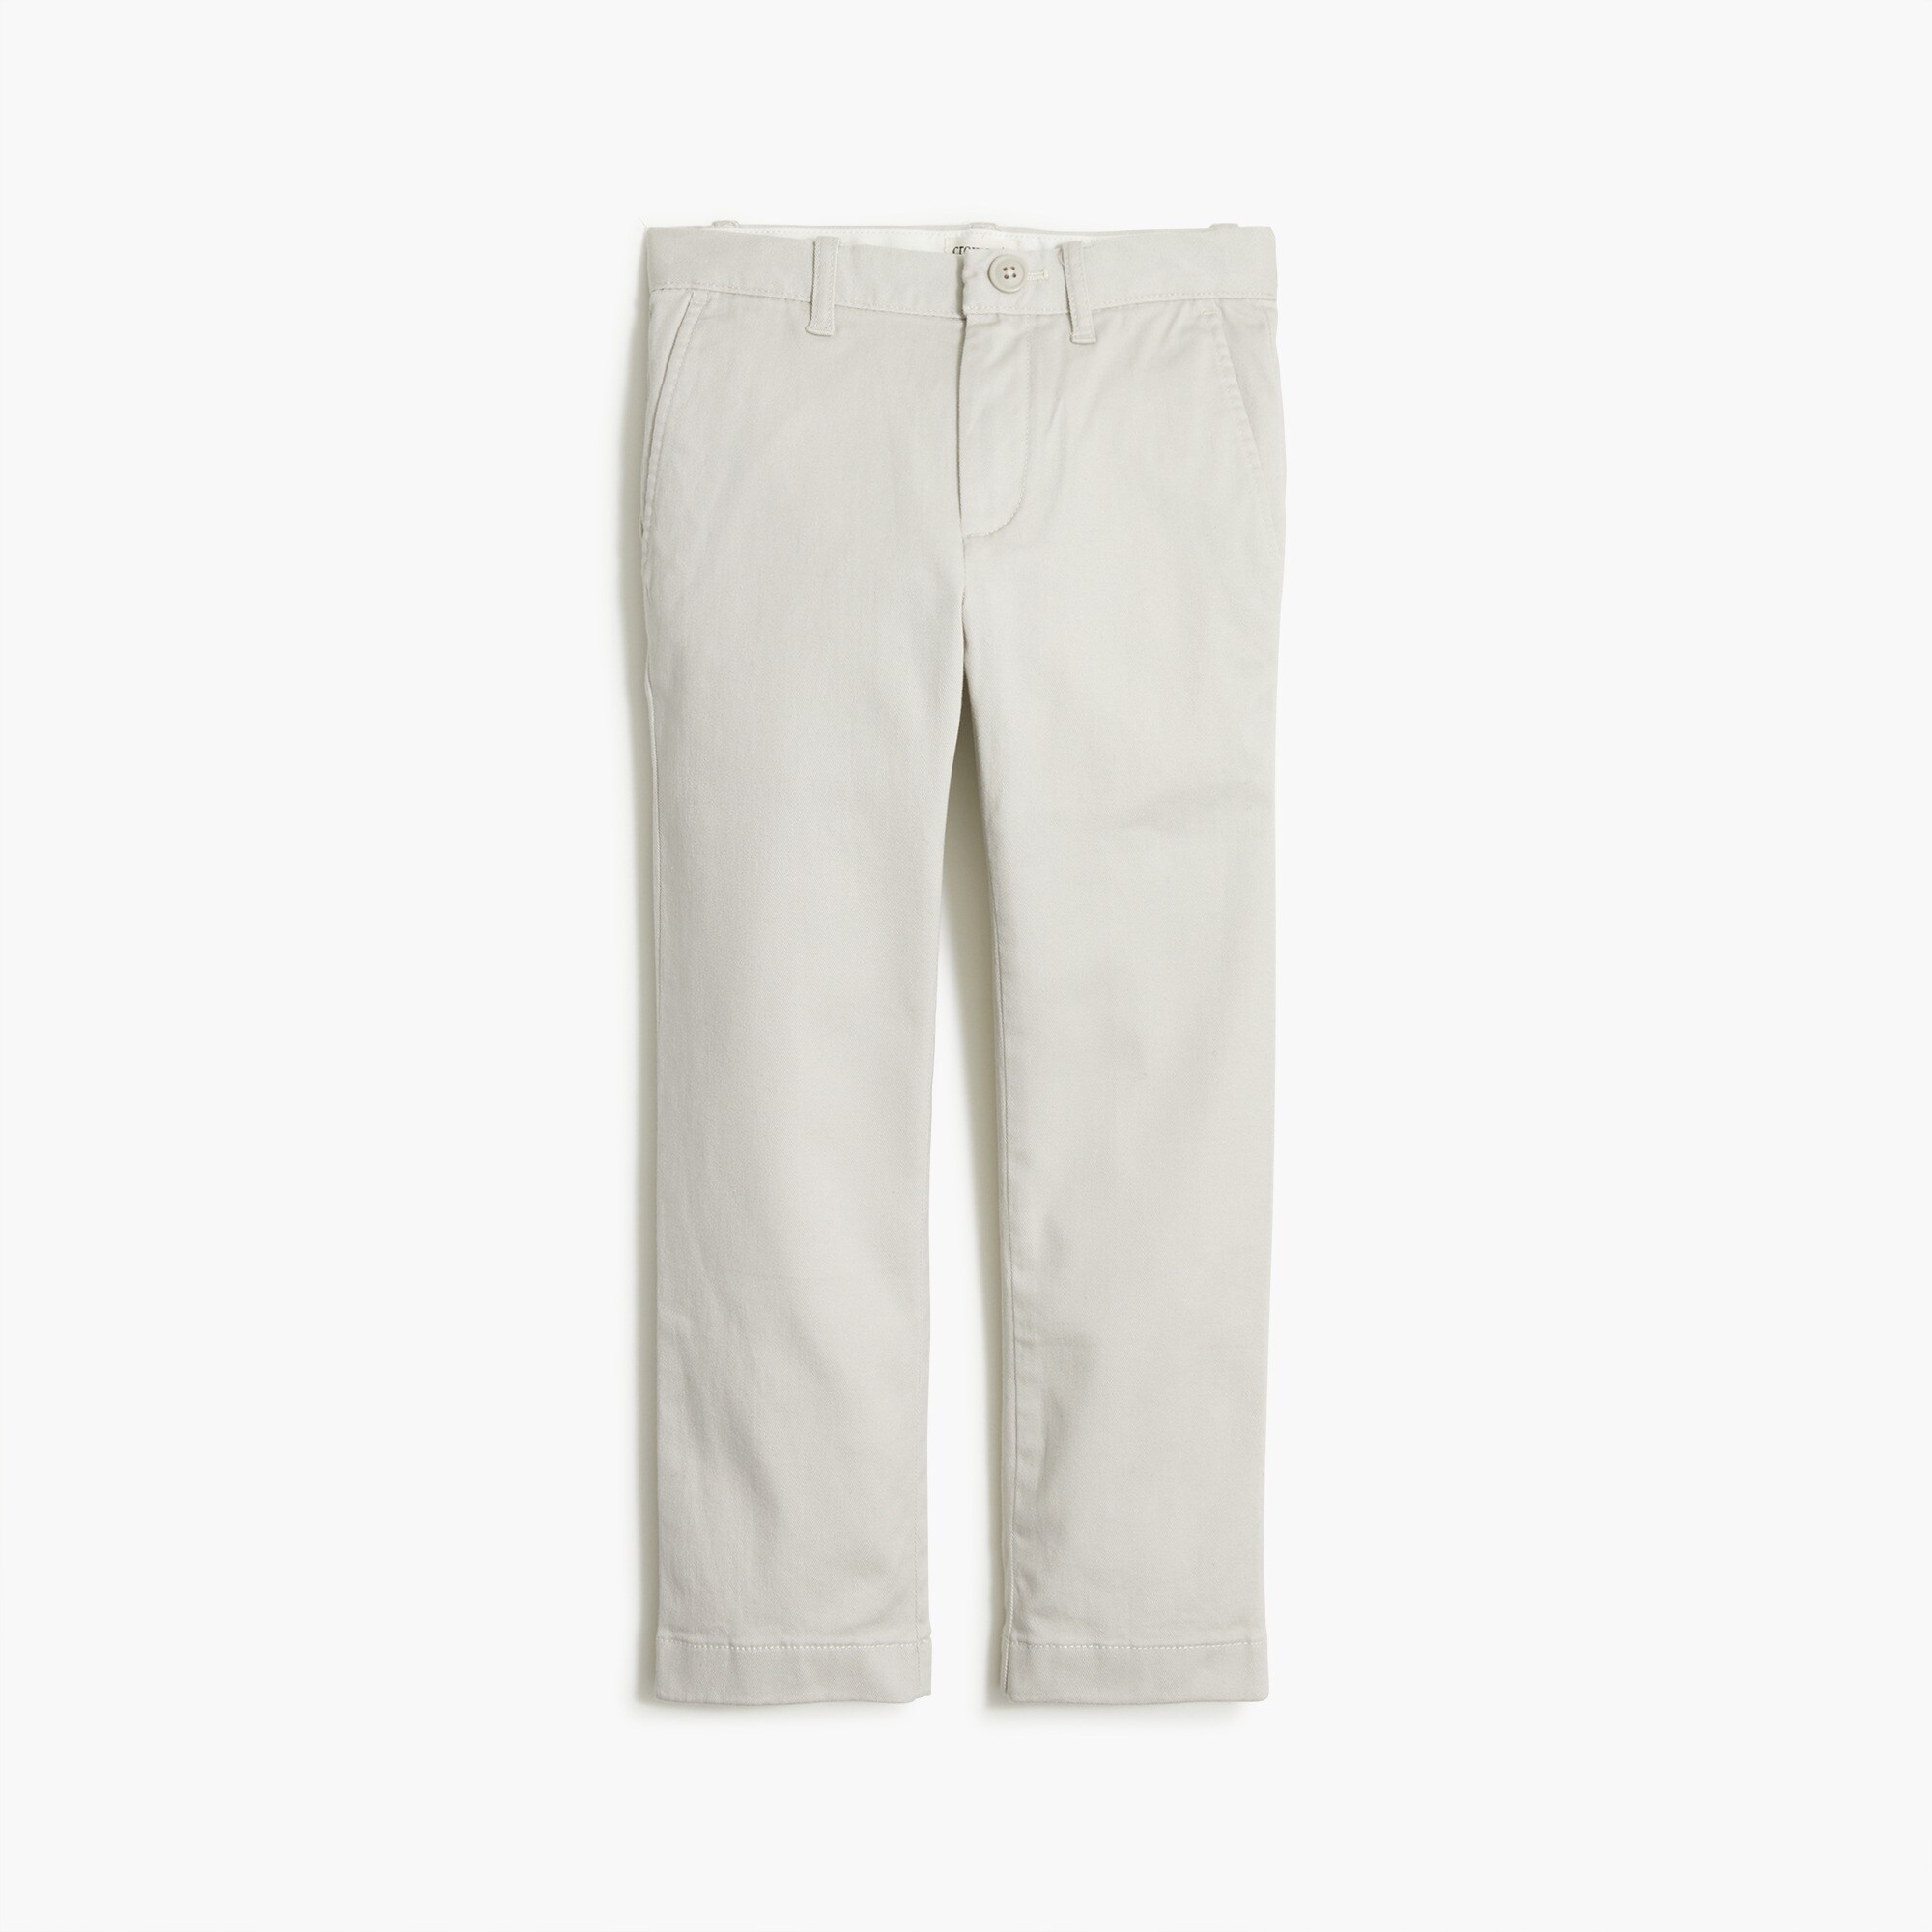  Boys' skinny-fit pant in flex chino